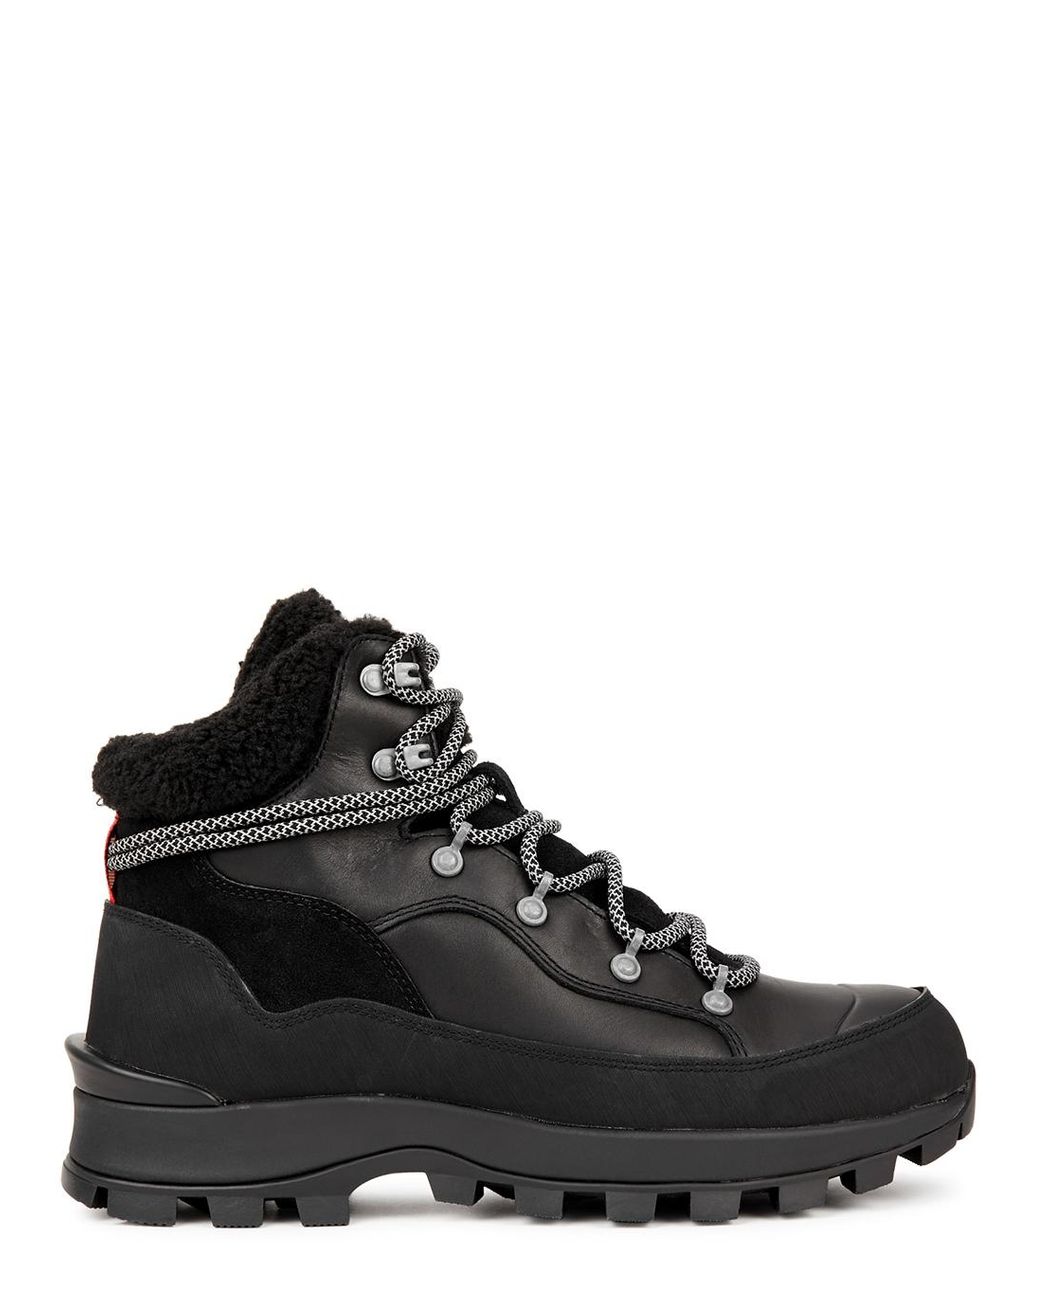 HUNTER Explorer Panelled Leather Hiking Boots in Black | Lyst